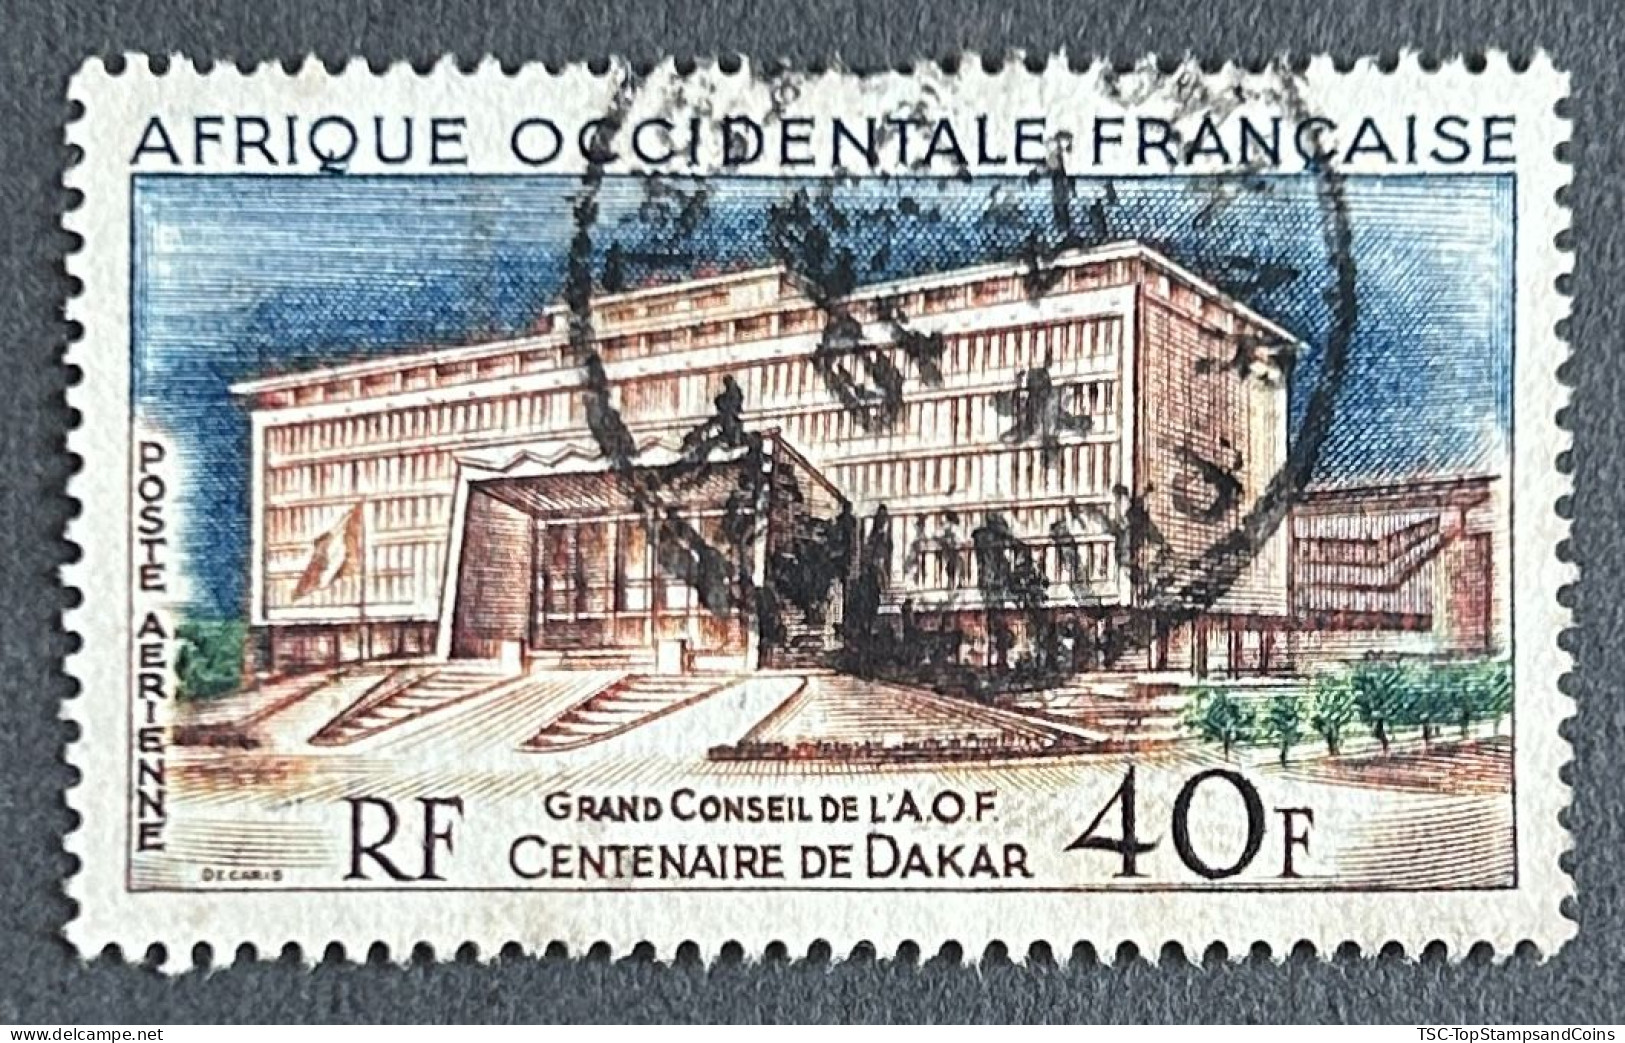 FRAWAPA025U1 - Airmail - Centenary Of Dakar - Palace Of The Grand Council - 40 F Used Stamp - AOF - 1958 - Oblitérés